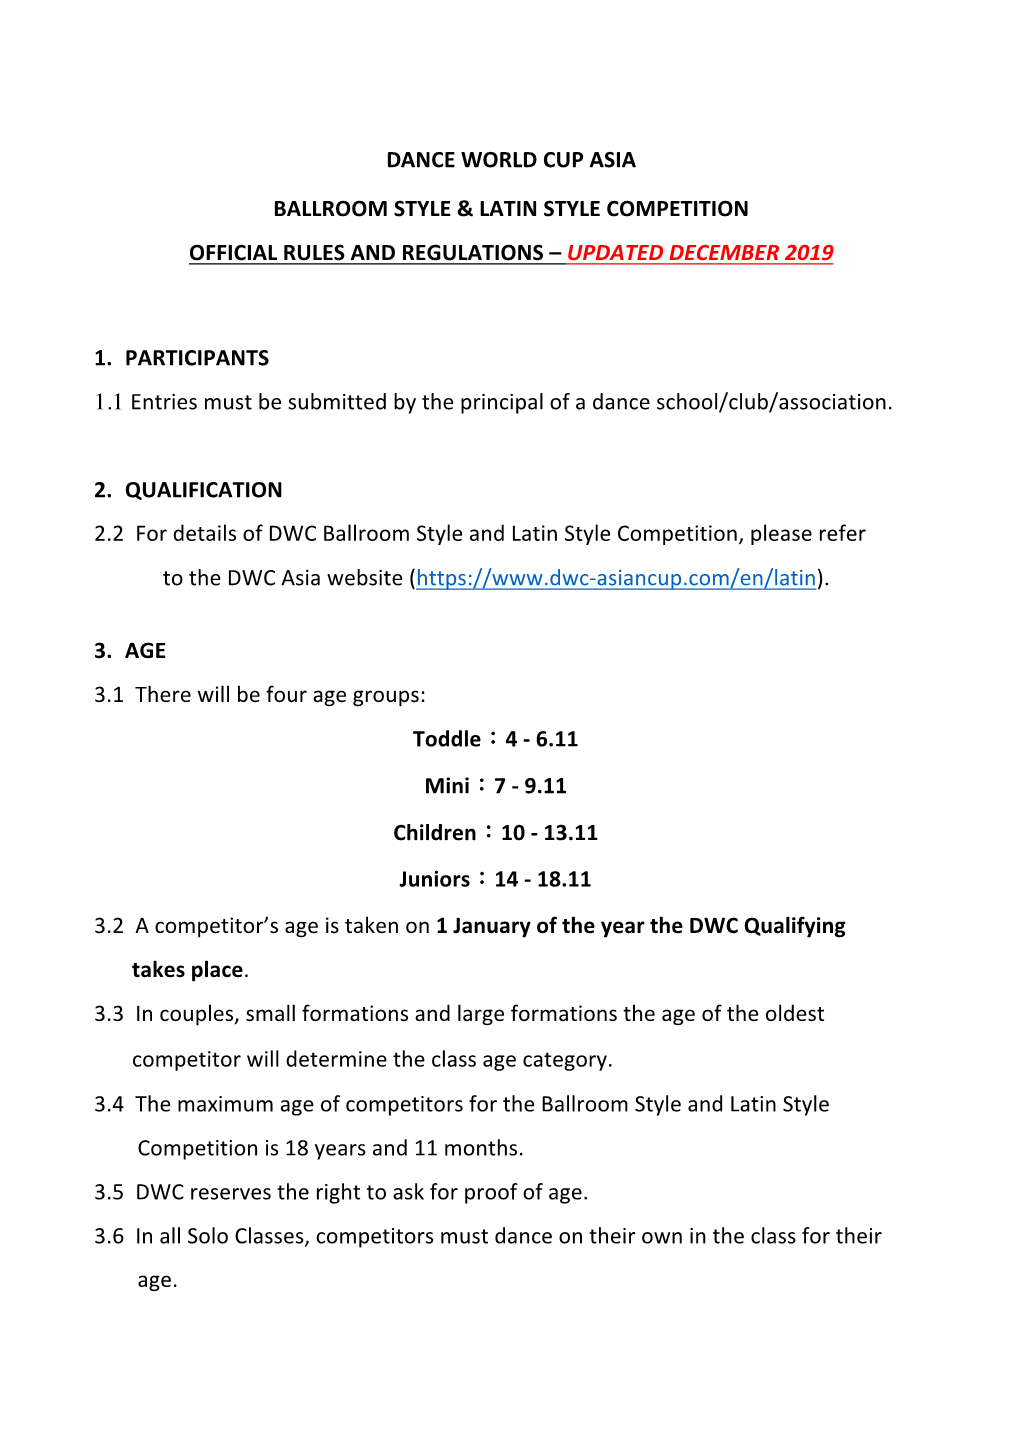 Dance World Cup Asia Ballroom Style & Latin Style Competition Official Rules